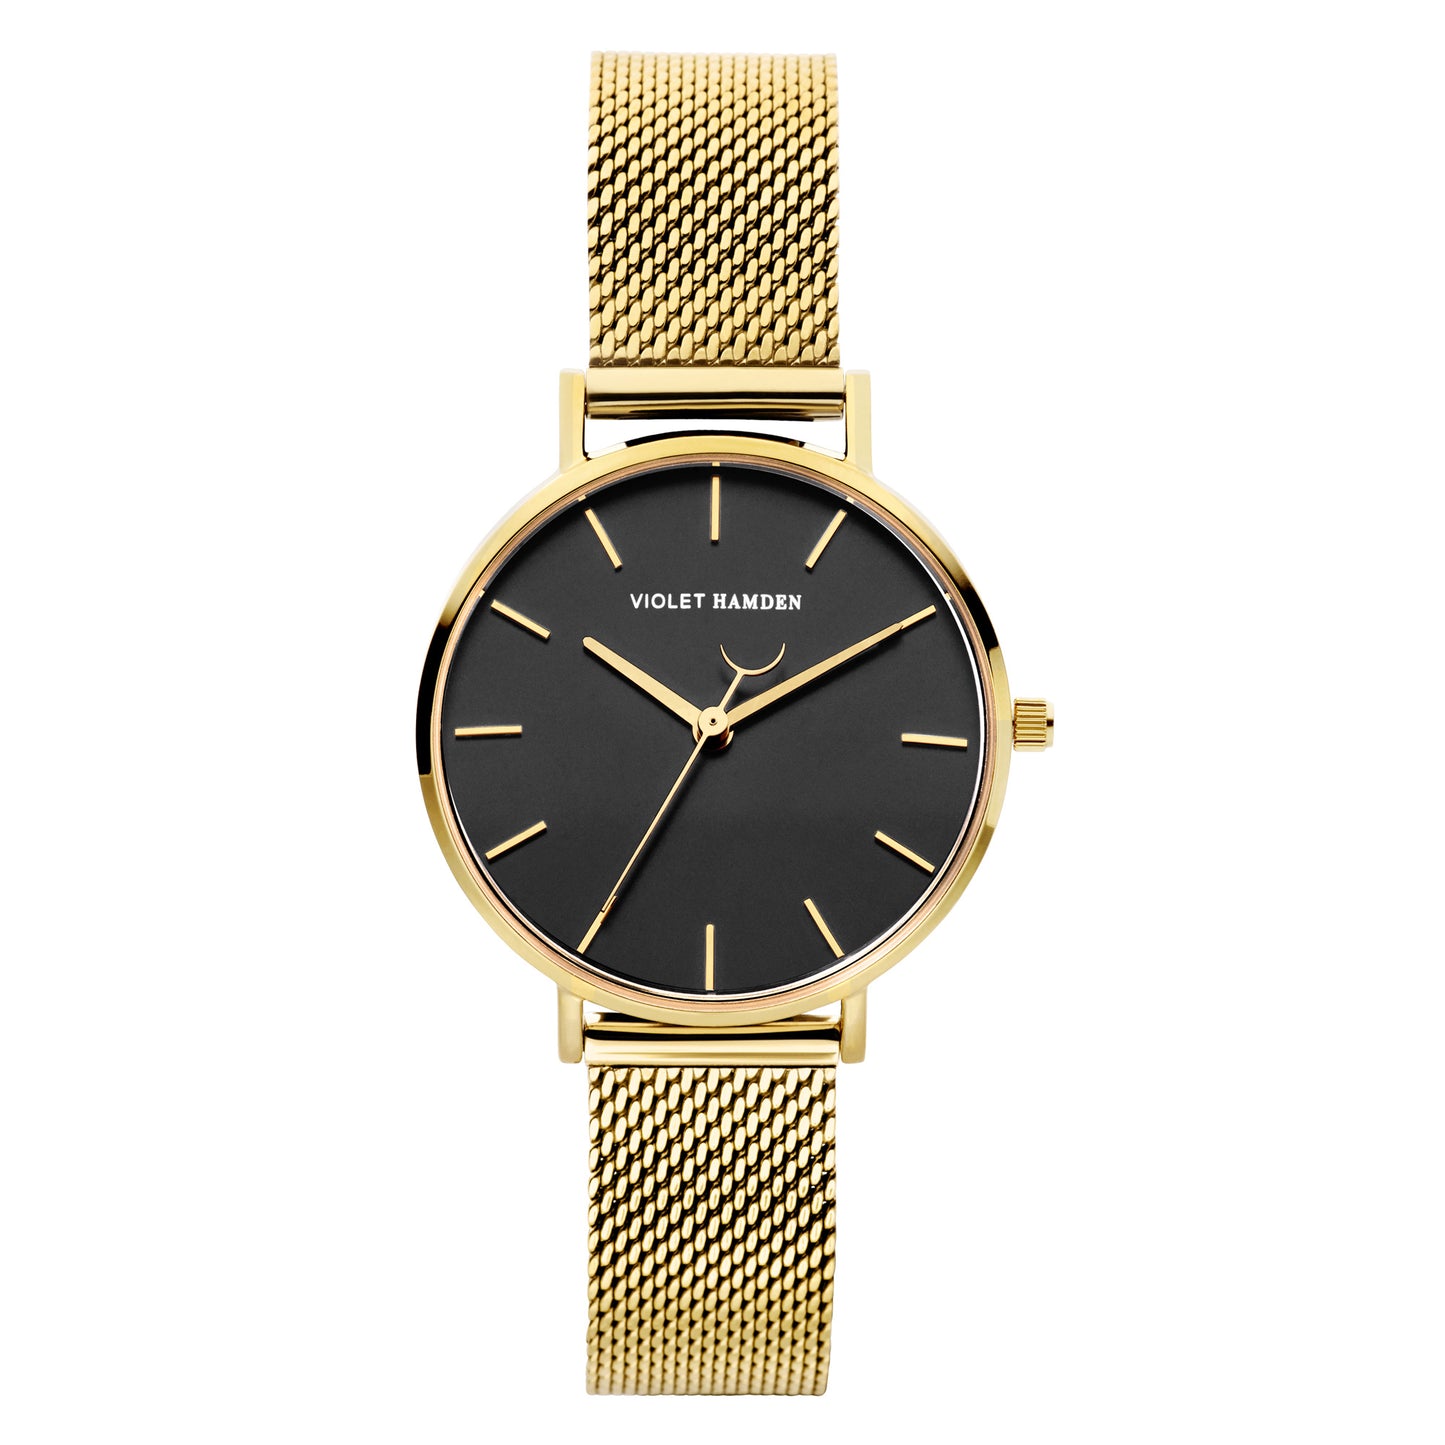 Day & Night round ladies watch gold and black coloured